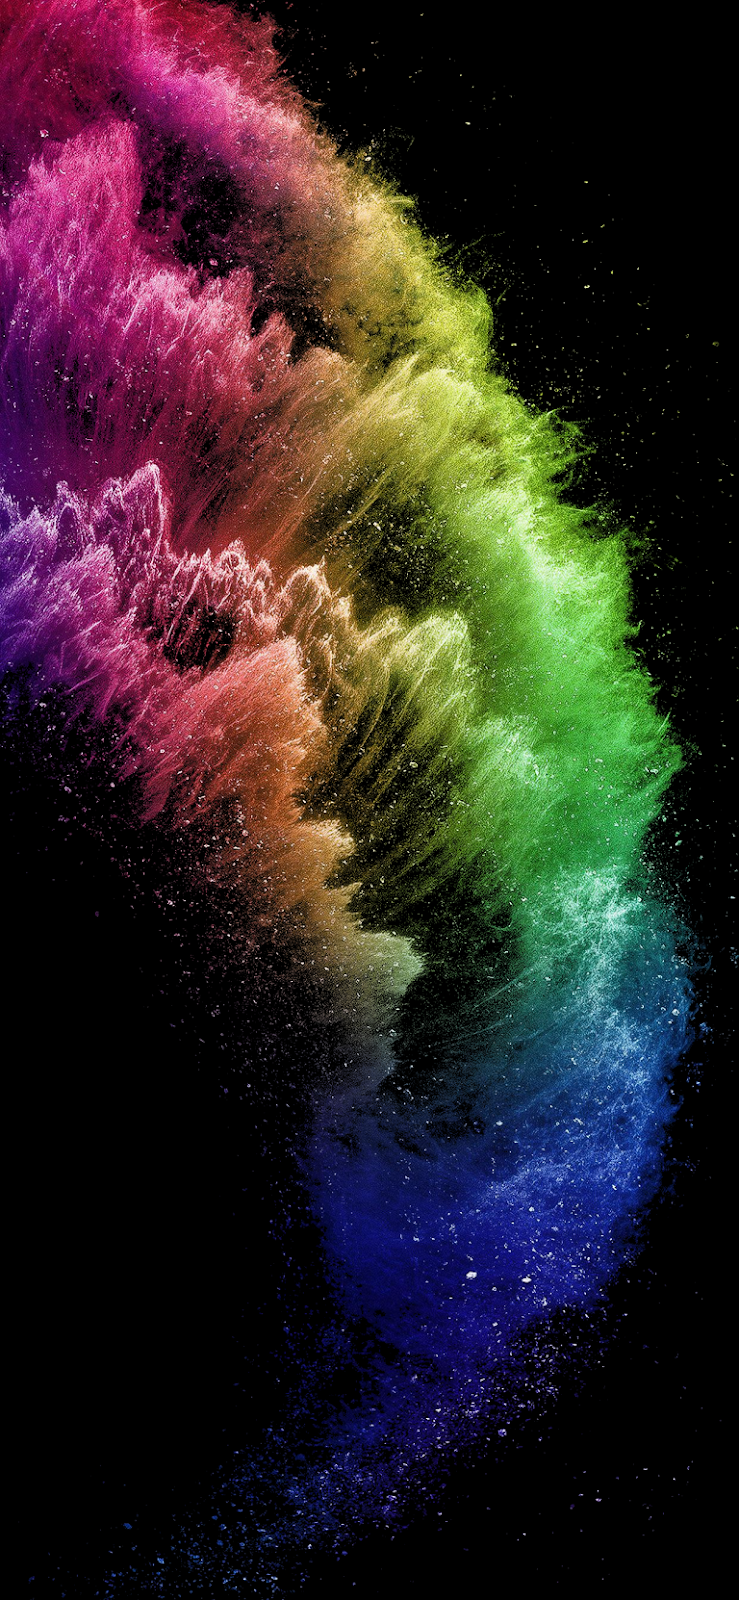 Free download 29] OLED Wallpaper on WallpaperSafari [739x1600] for 739x1600